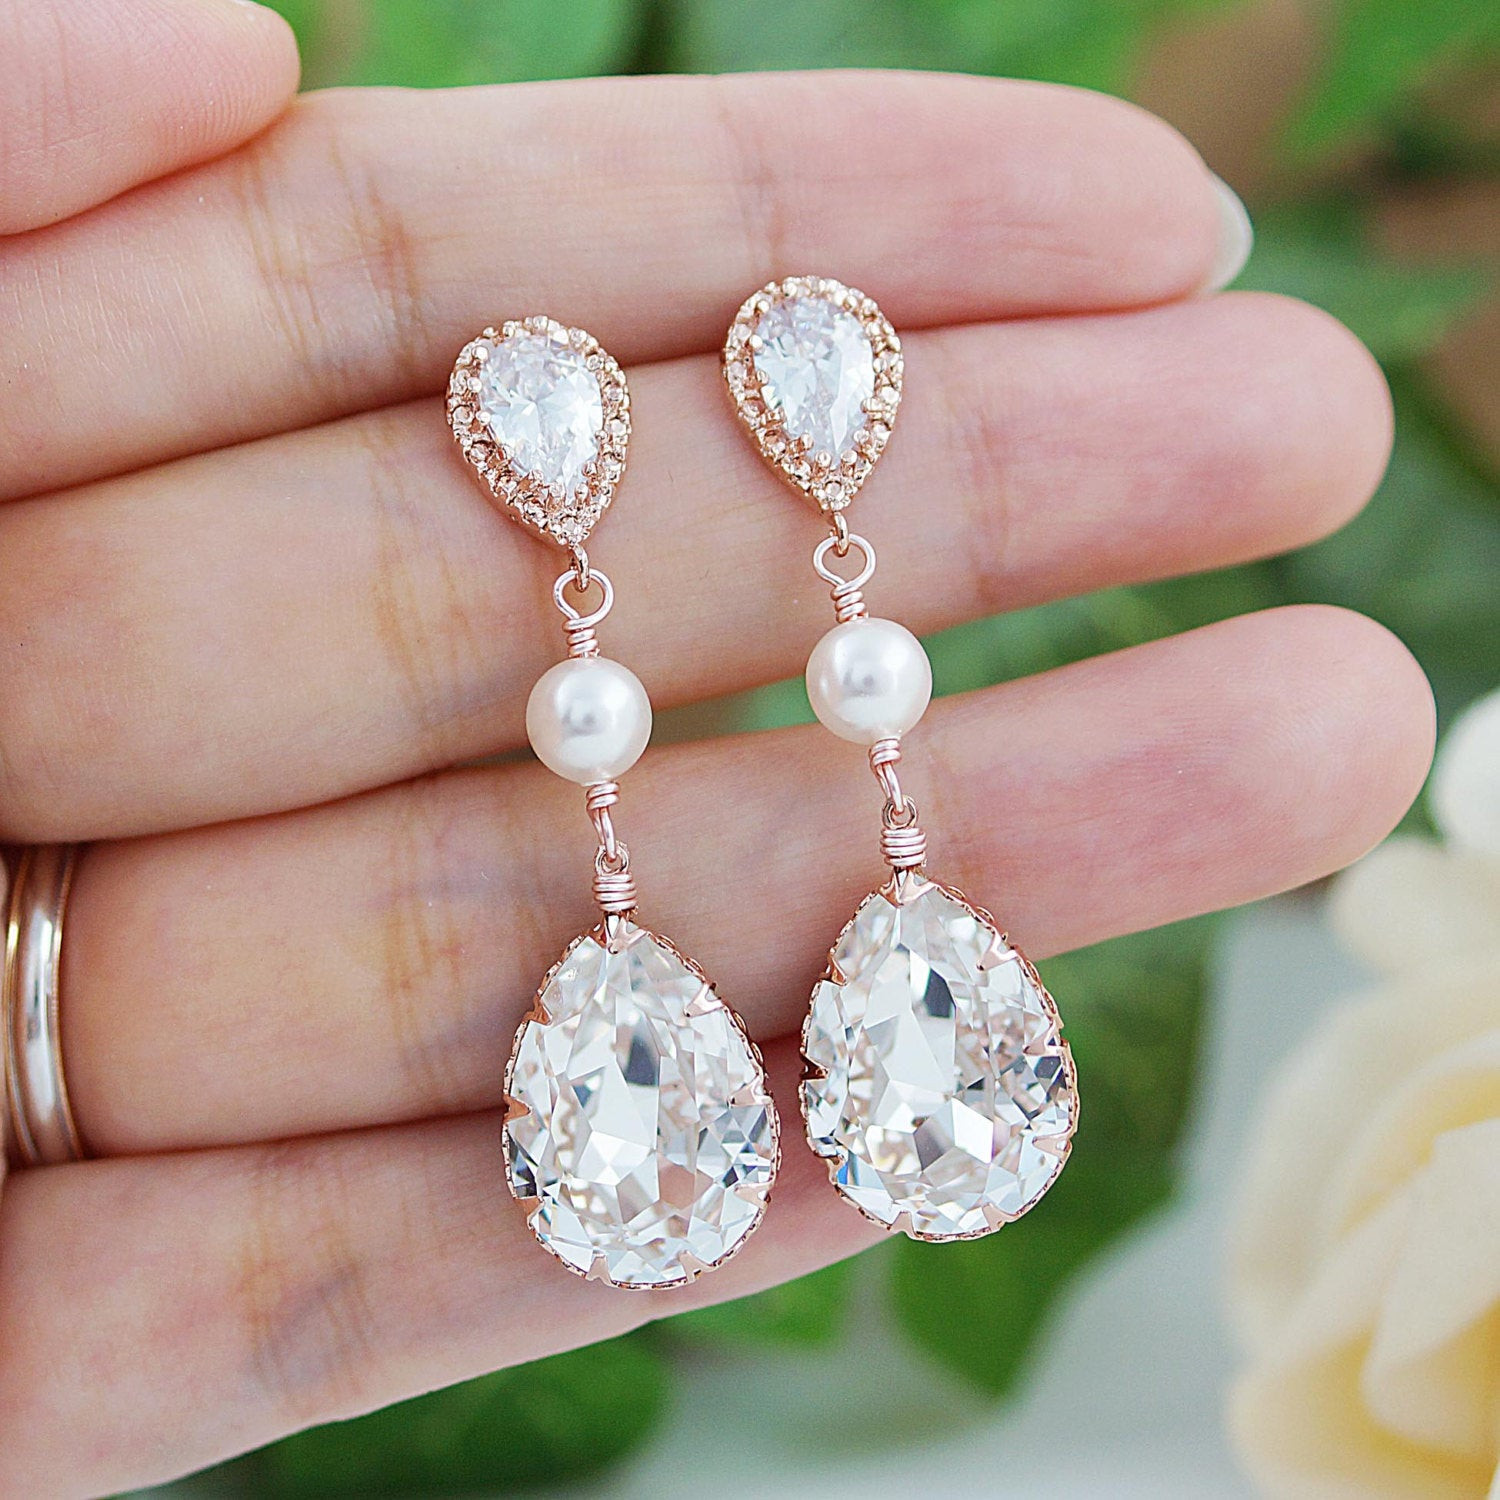 Earrings For Bridesmaids
 Wedding Jewelry Bridal Earrings Bridesmaid t Bridesmaid